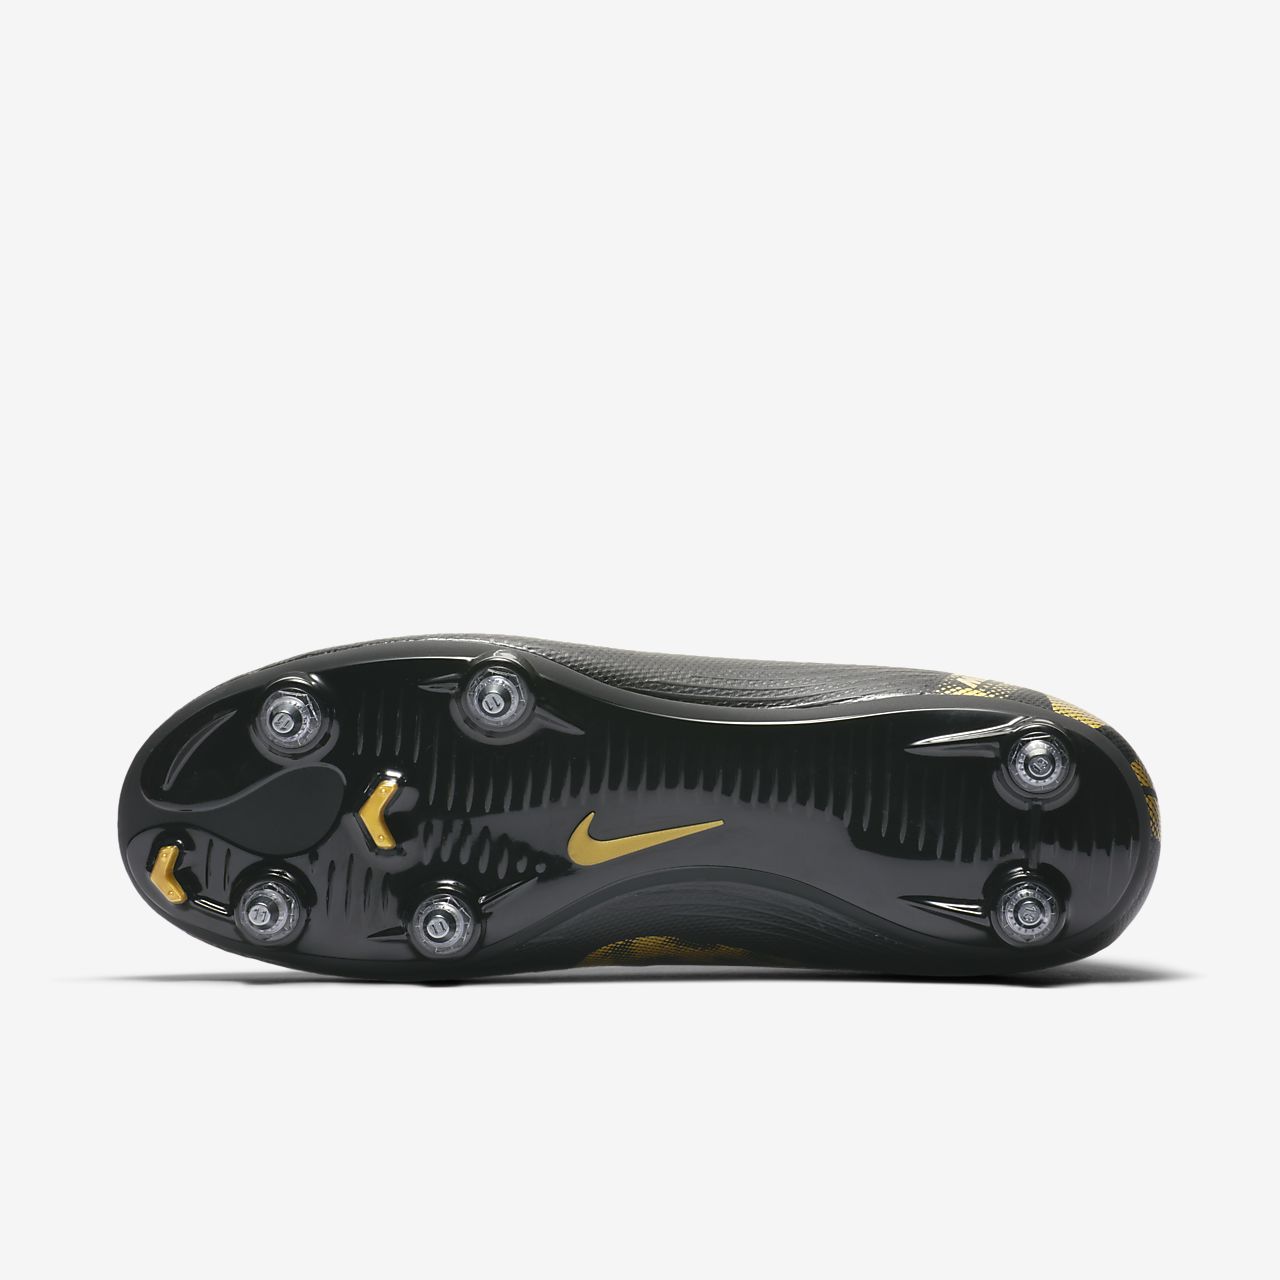 Football Boots Nike Mercurial Superfly VI Pro CR7 AG Pro.